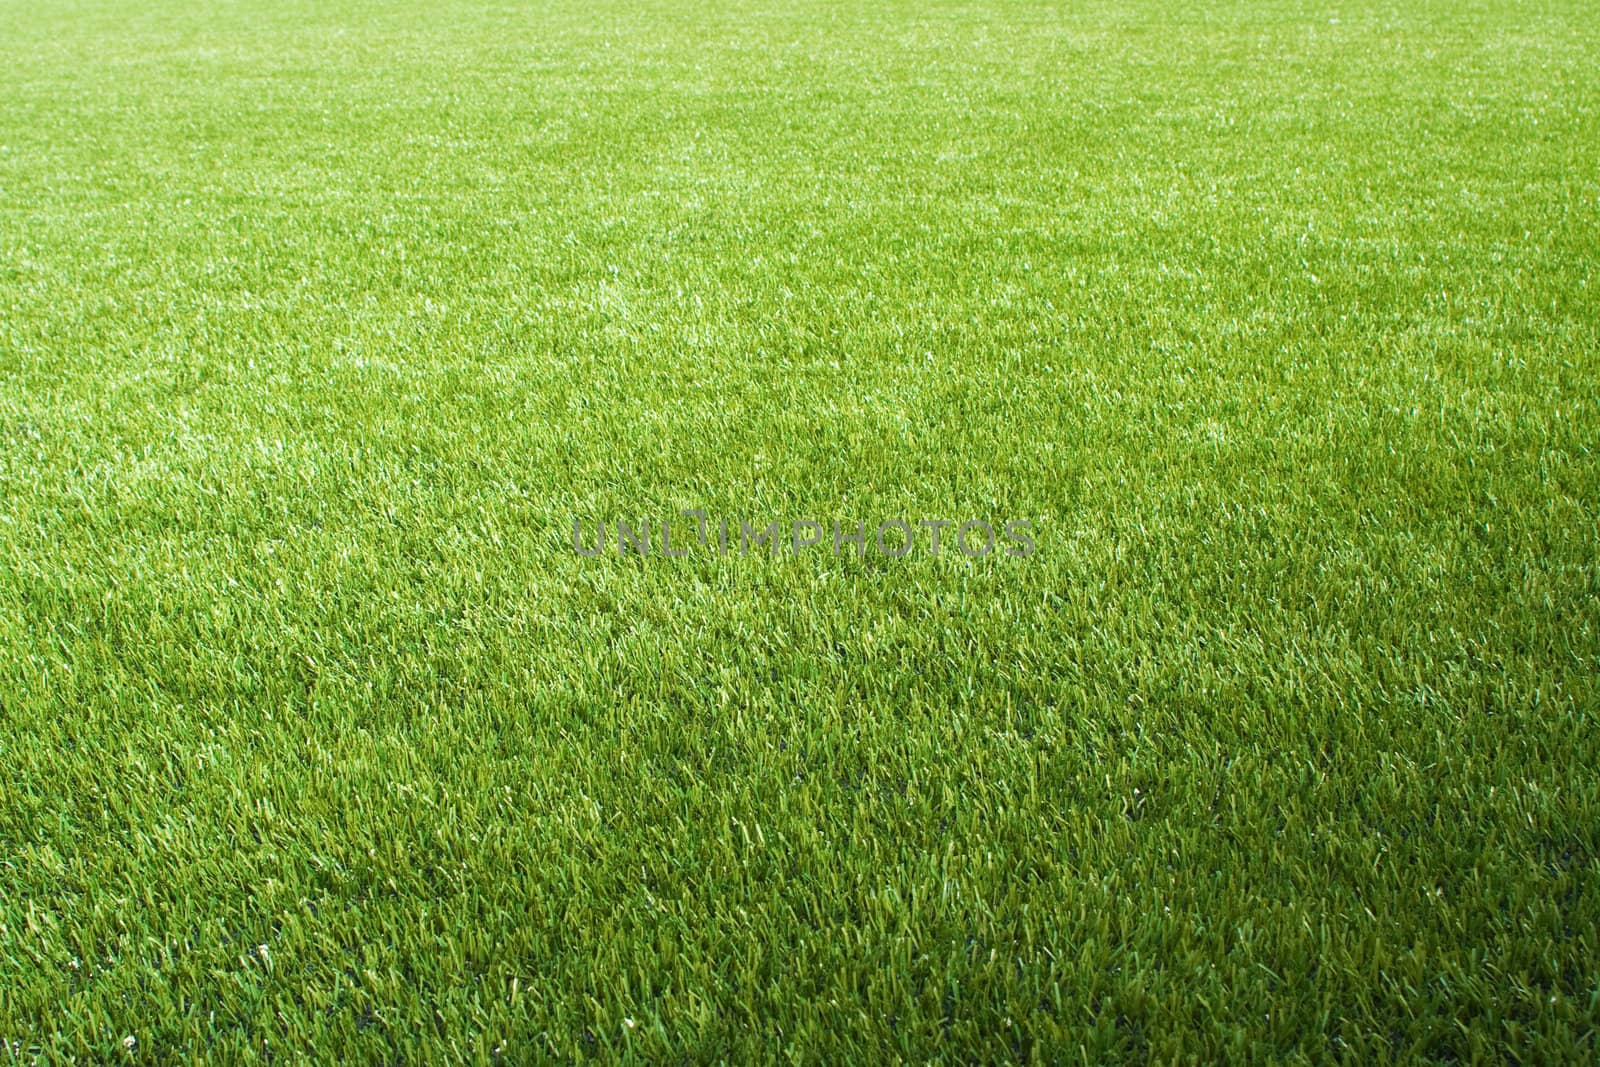 Artificial lawn on the foolball/soccer field, suitable as a background